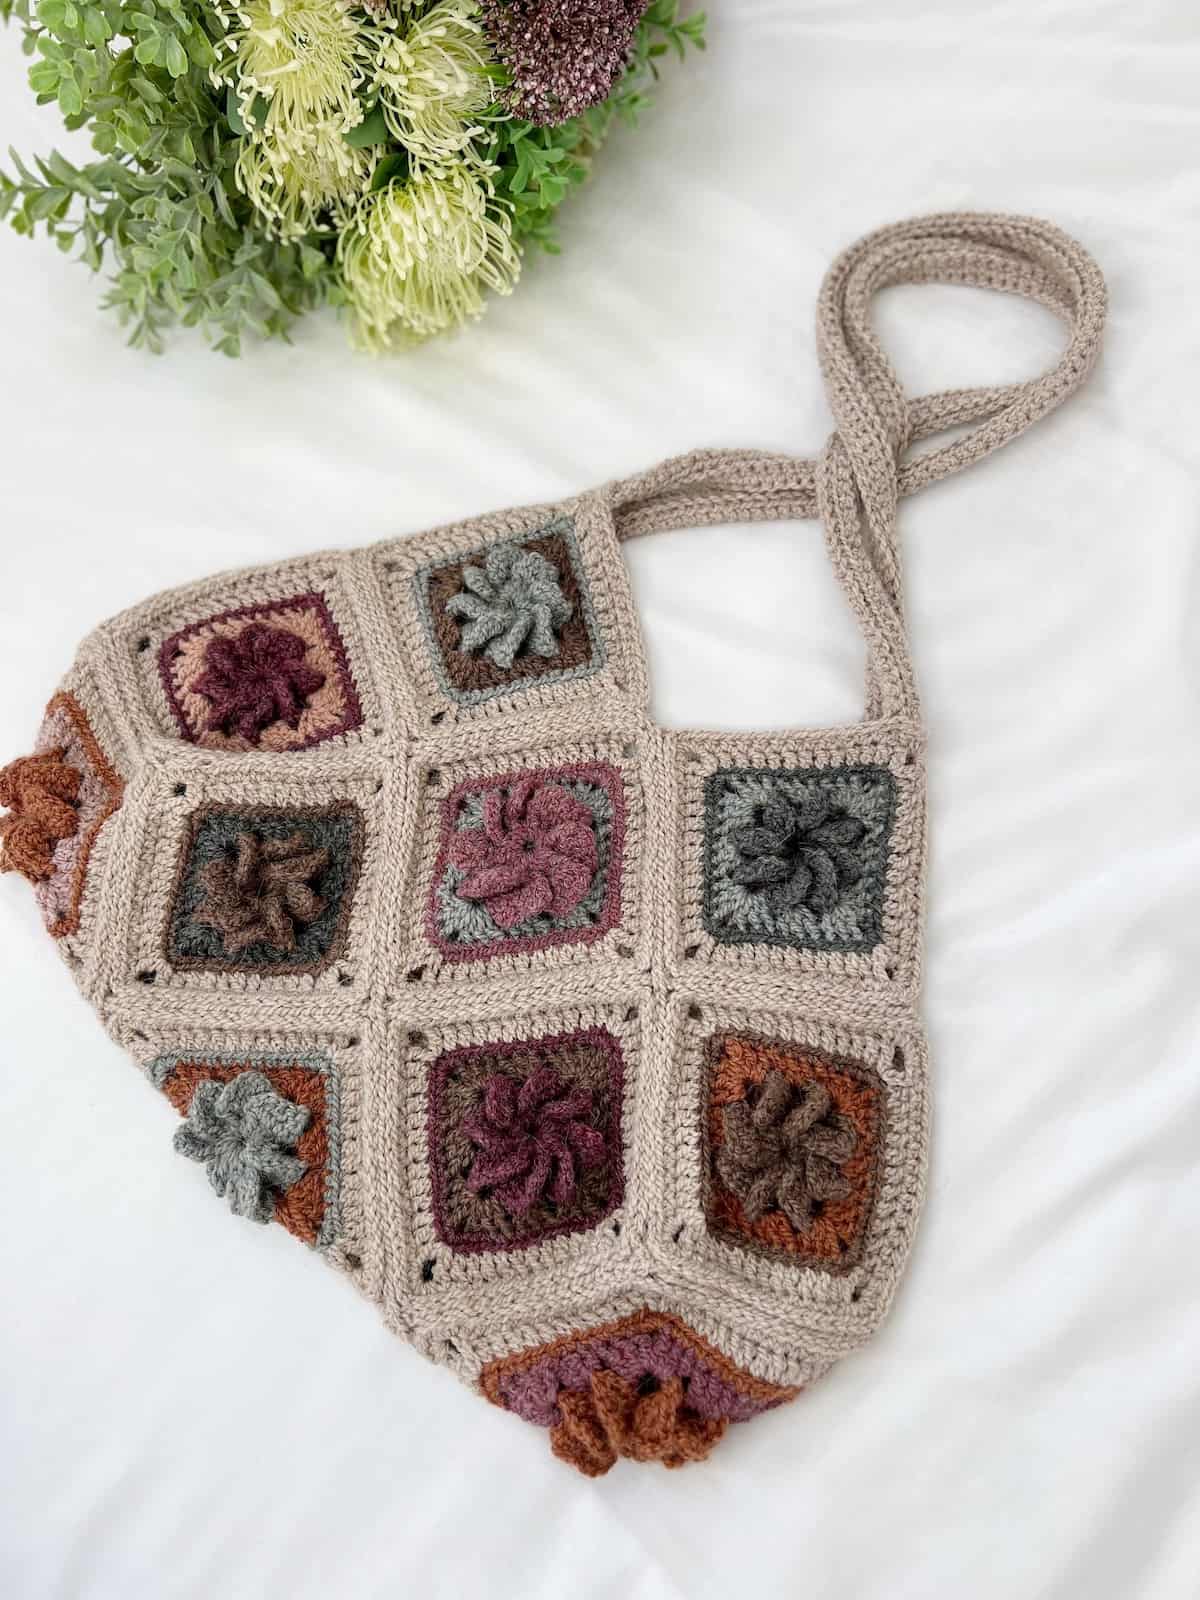 A crocheted bag with flowers on it.